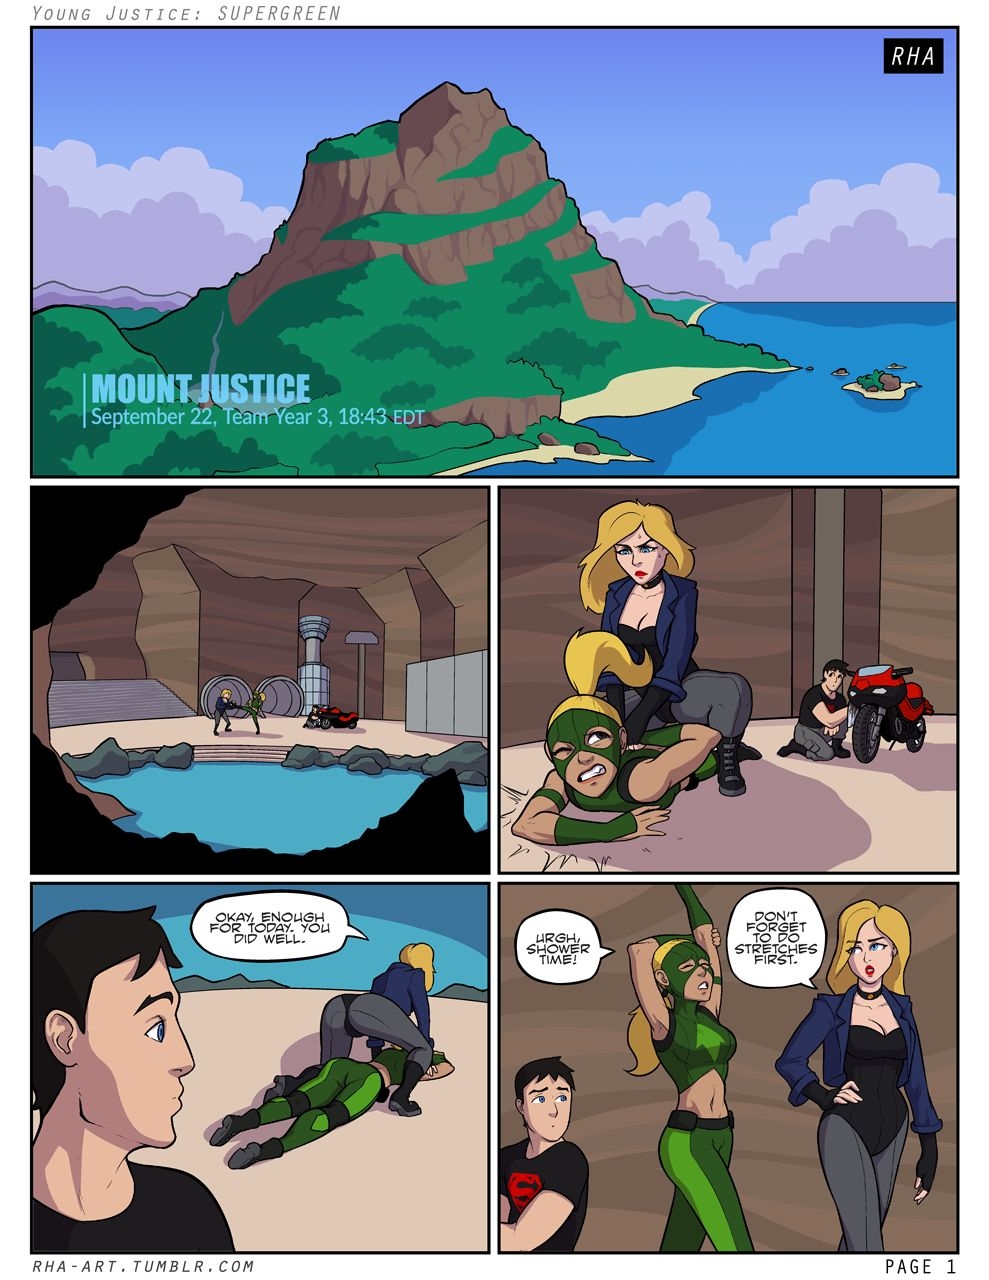 [Rha] Young Justice: Supergreen (Young Justice) 1